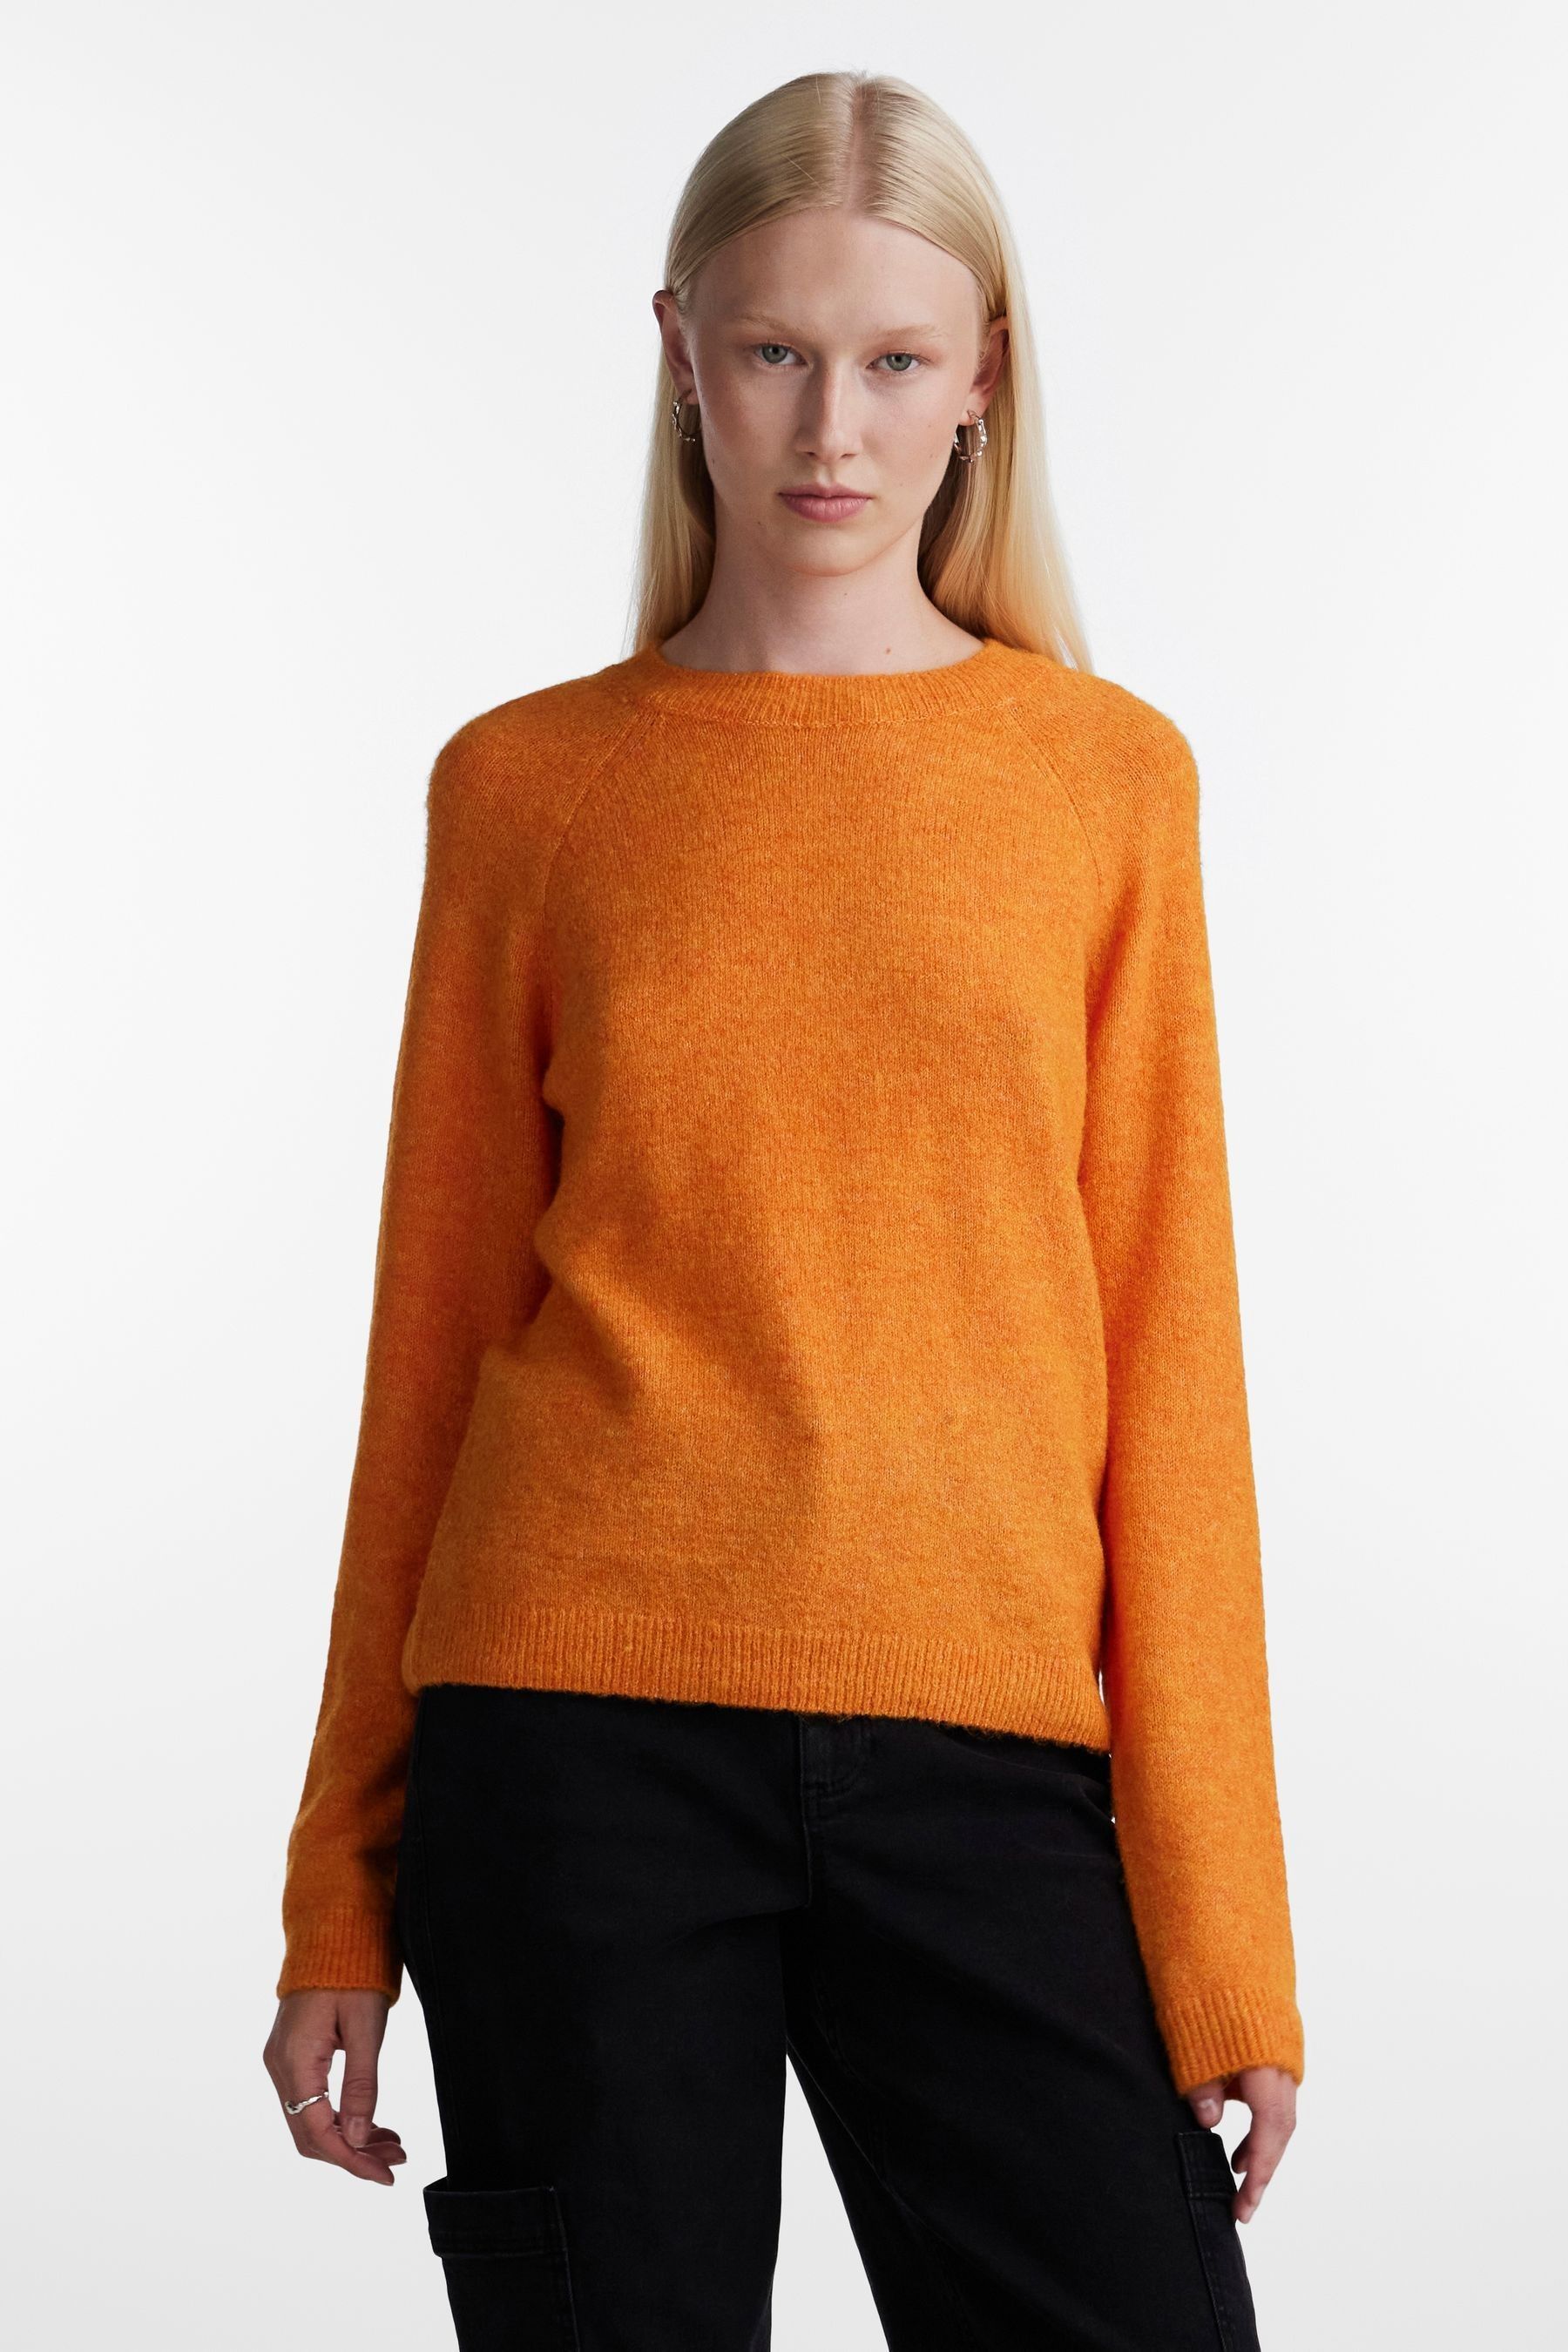 Buy PIECES Orange Crew Neck Soft Touch Jumper from the Next UK online shop